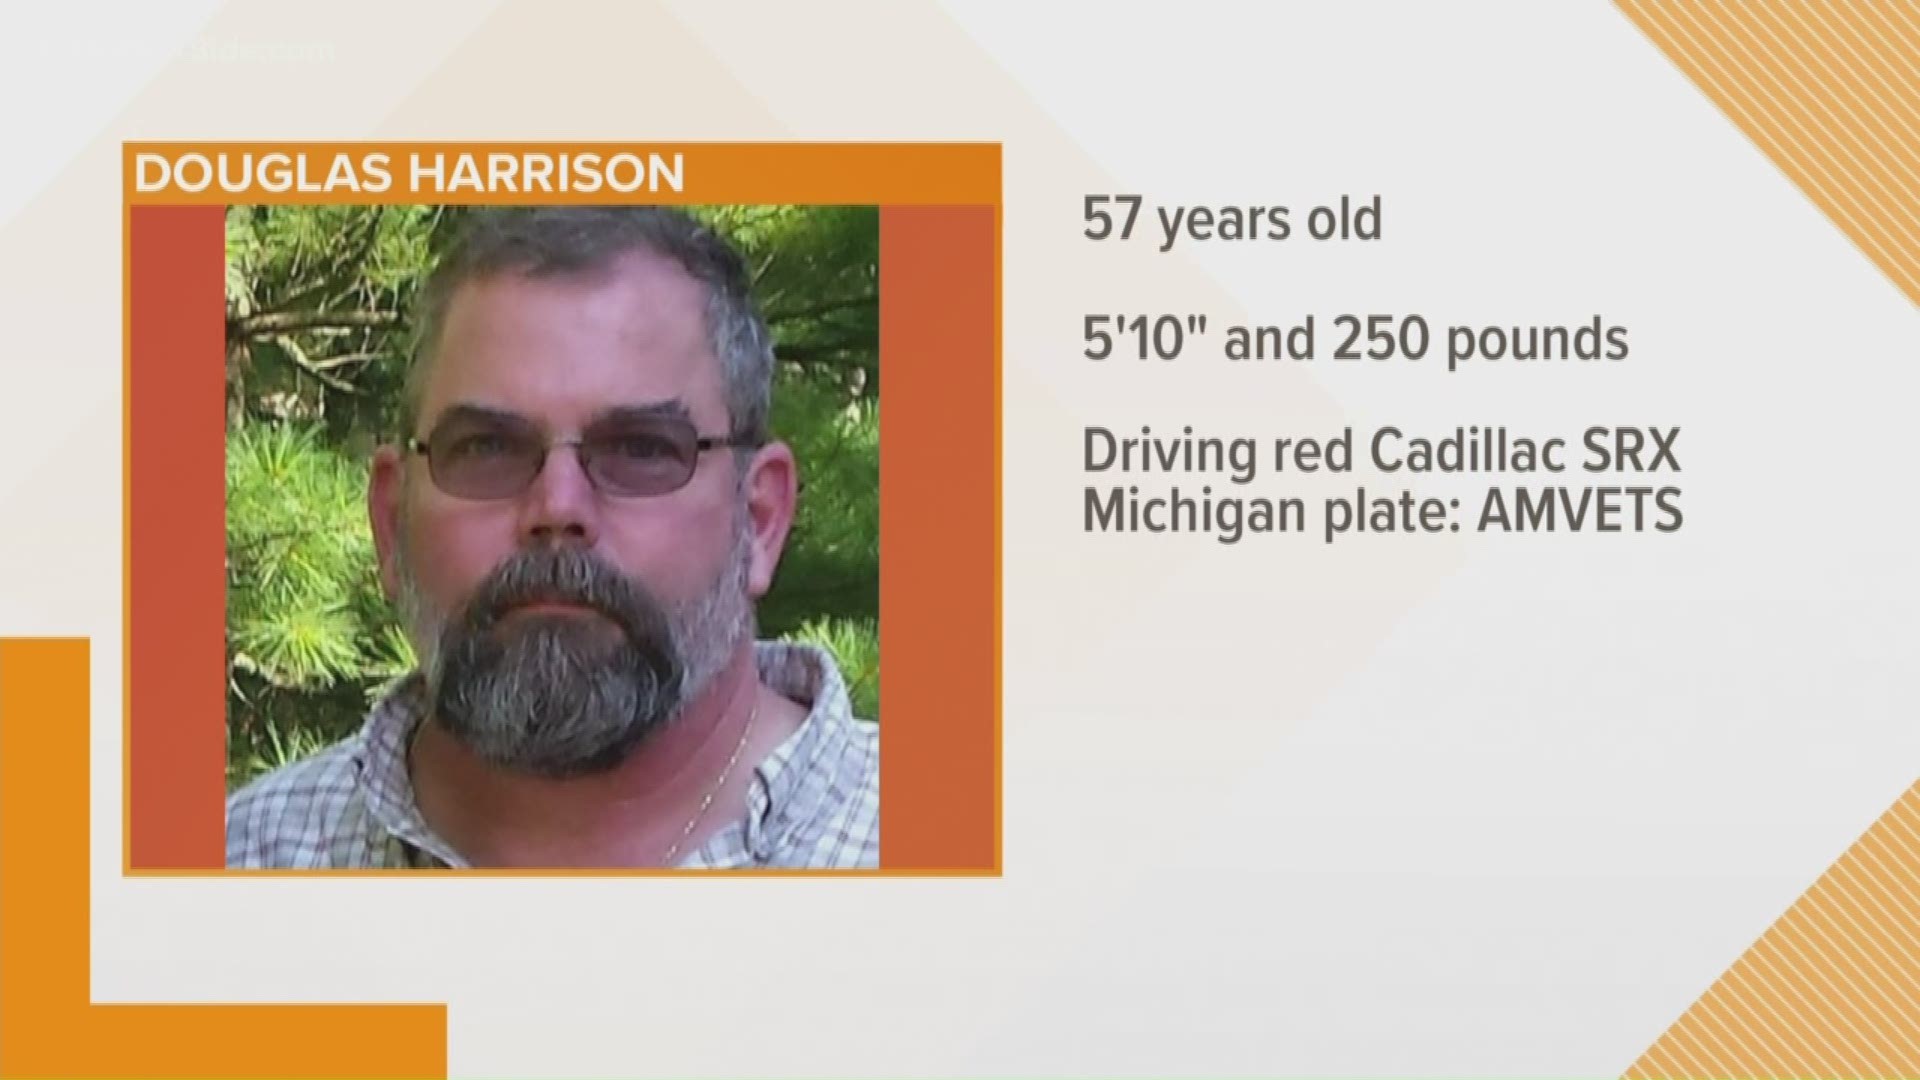 Anyone who has information about Harrison's whereabouts is asked to call 911 or the Lake County Sheriff's Office.